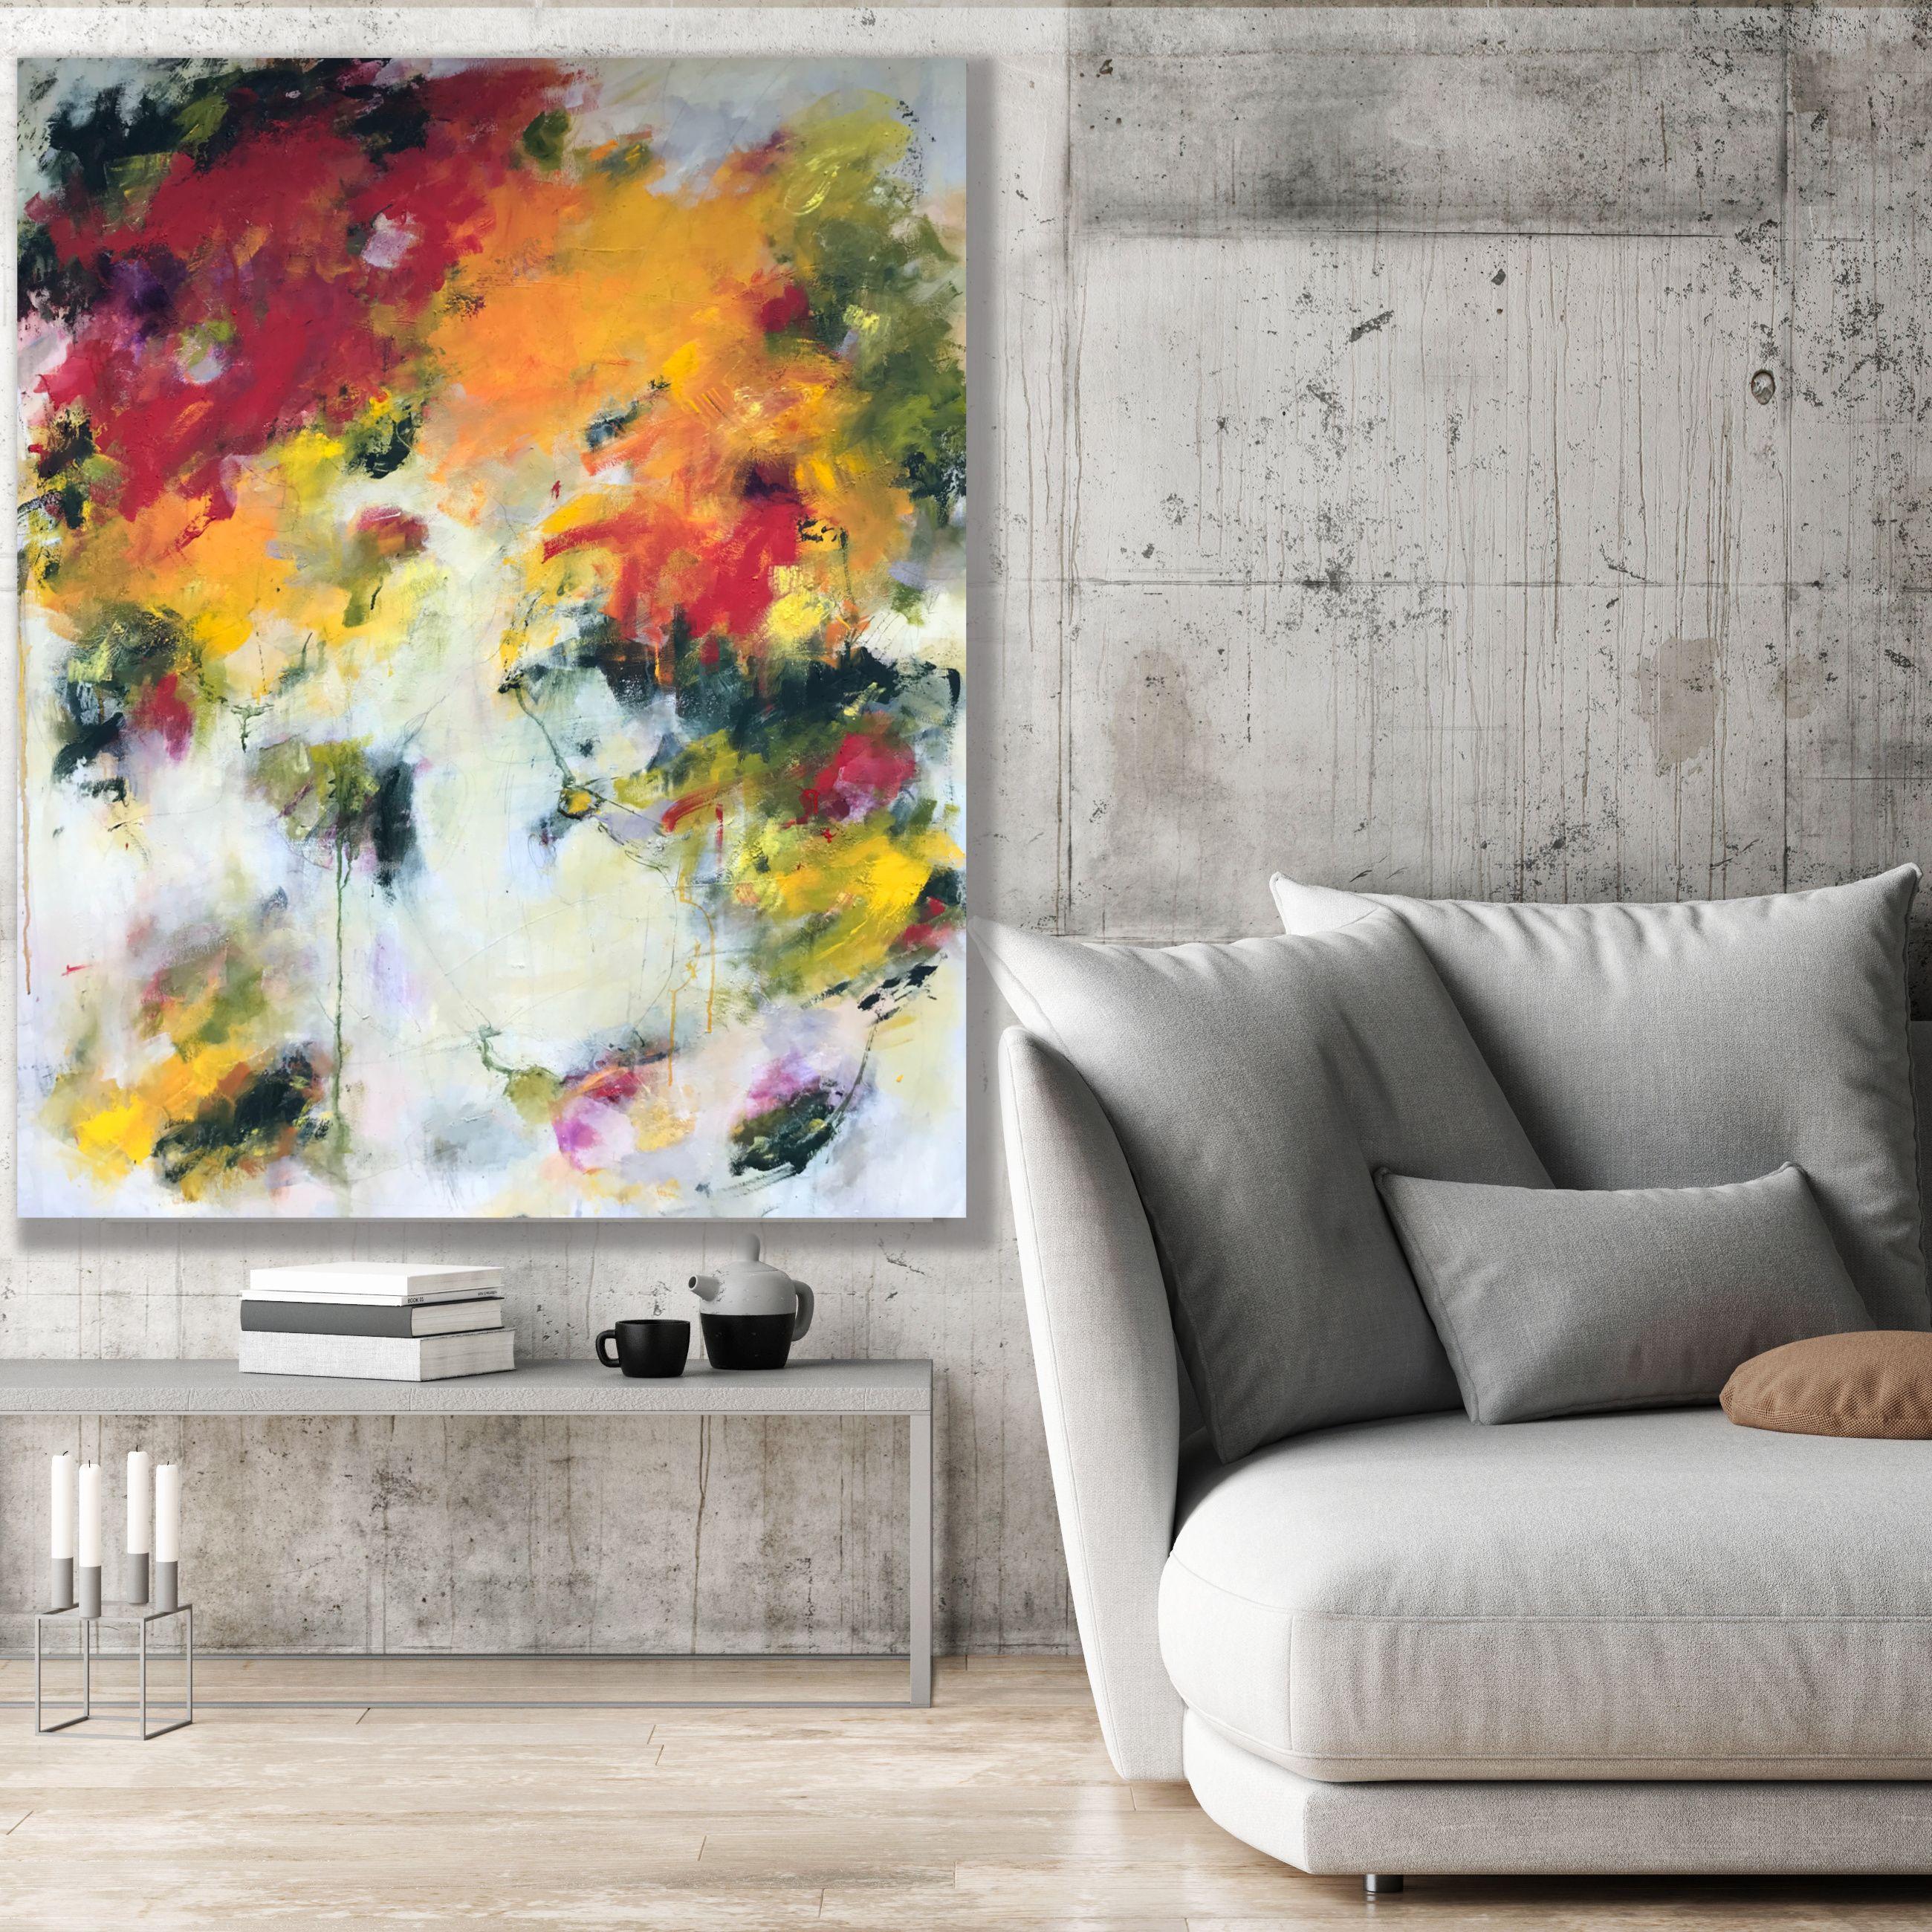 This beautifully dynamic piece was inspired by the beautiful Goethe poem of the same name. The painting is attempting to capture the mood of a summer's day.    The painting has been built over many layers of paint. I enjoyed bold brush strokes and